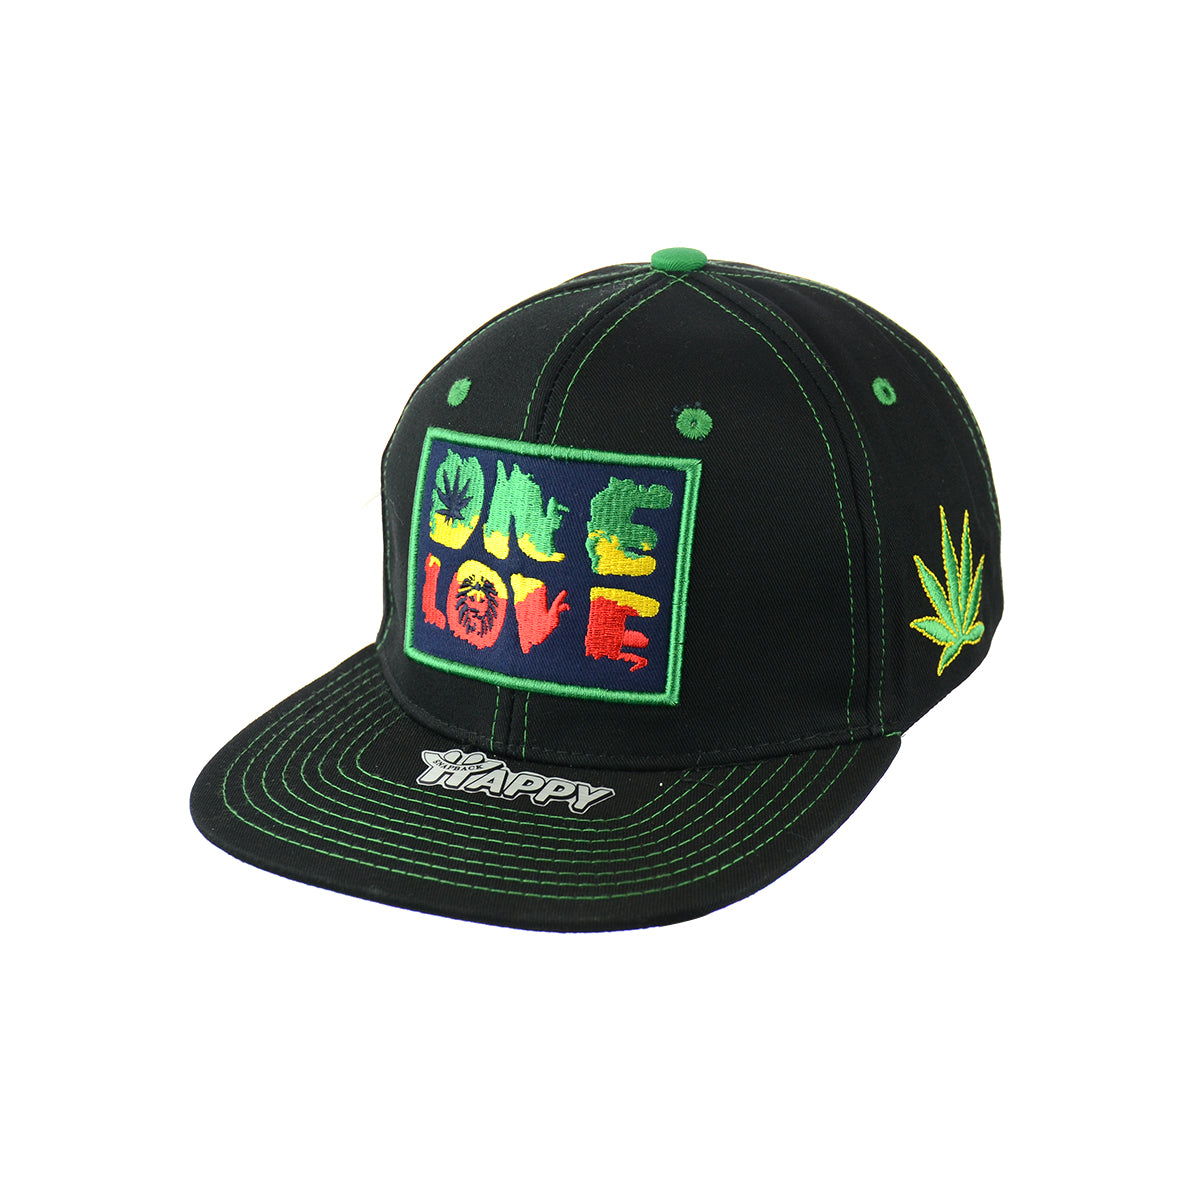 One Love Hat Embroidered Snapback